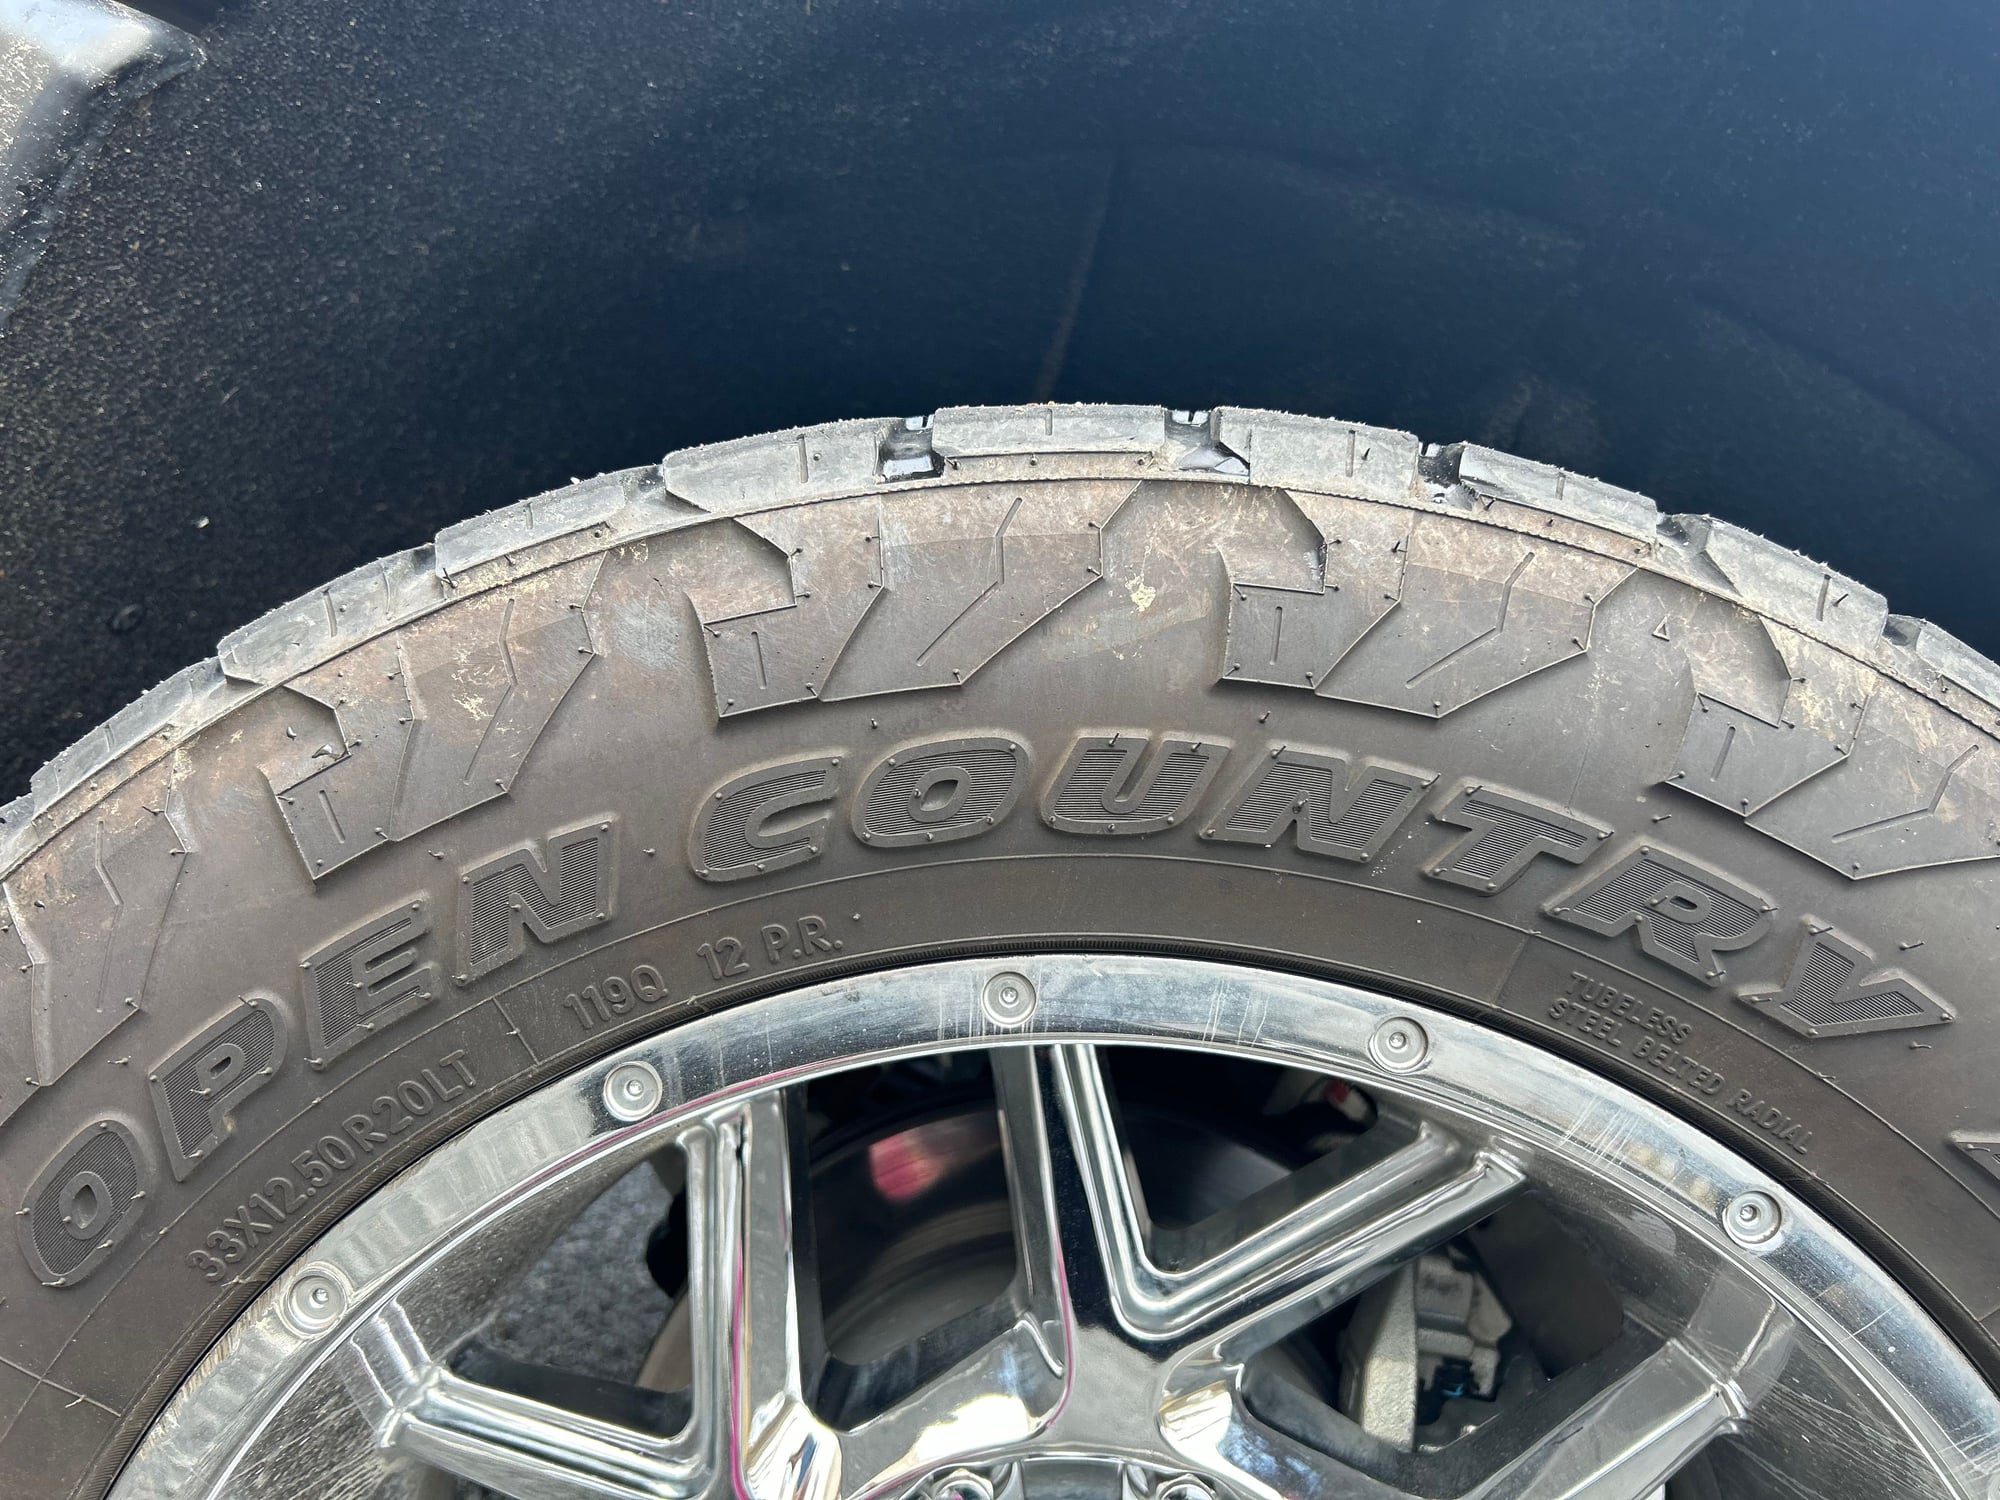 Wheels and Tires/Axles - 33/12.5/20 Rims with toyo - Used - 2011 to 2024 Chevrolet Silverado 2500 HD - Andover, NJ 07821, United States